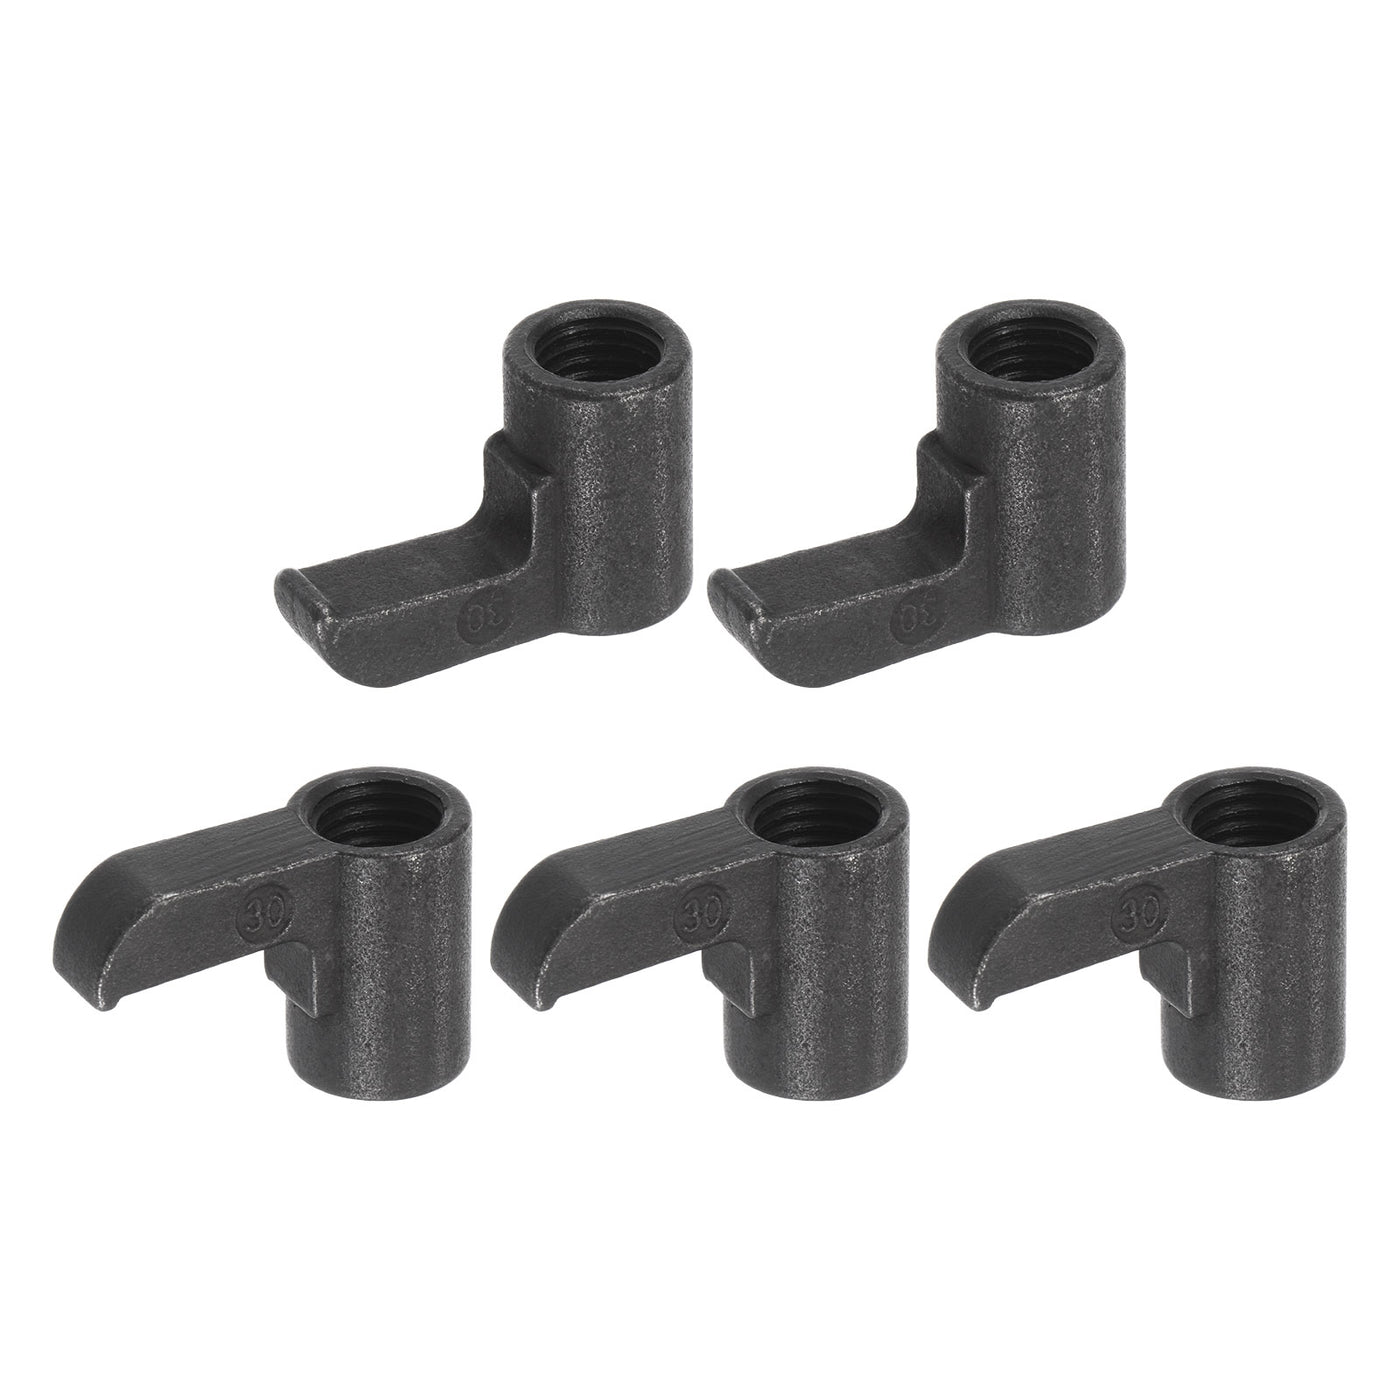 uxcell Uxcell CL-30 Inserts Plate Finger Clamp for CNC Lathe Turning Tool, 5Pcs